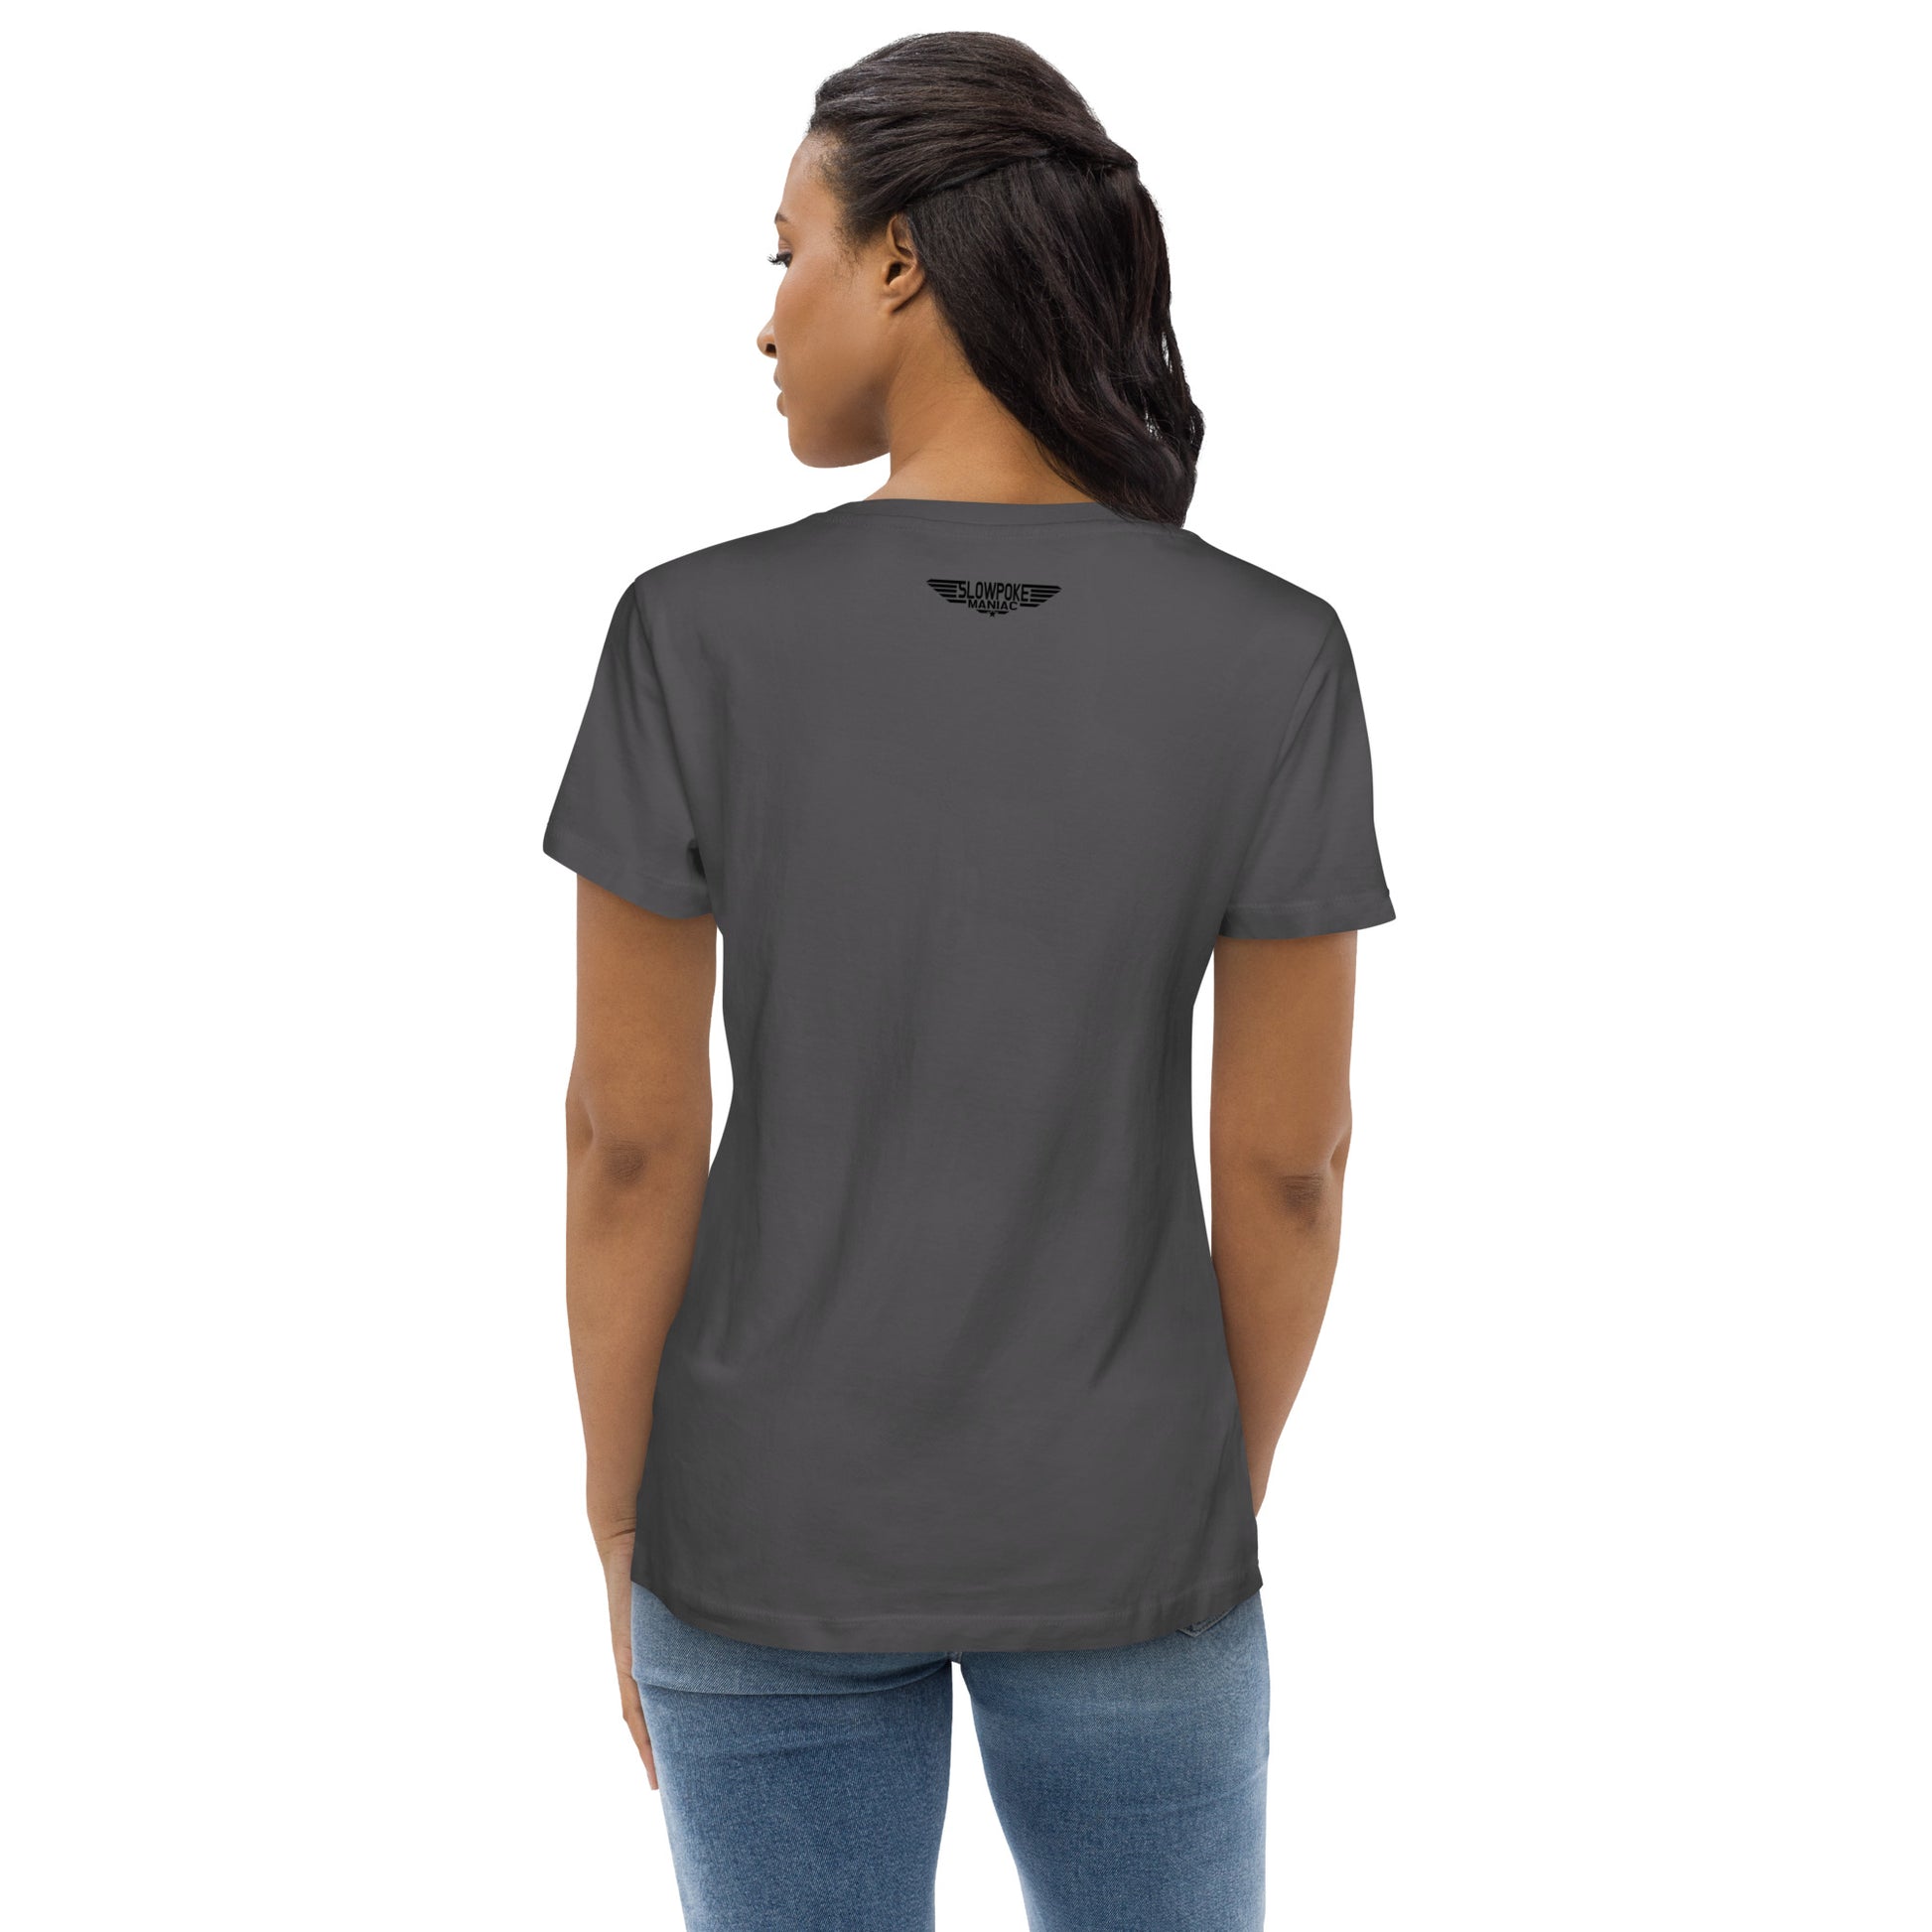 Top Dog Fitted Tee (Women) Anthracite